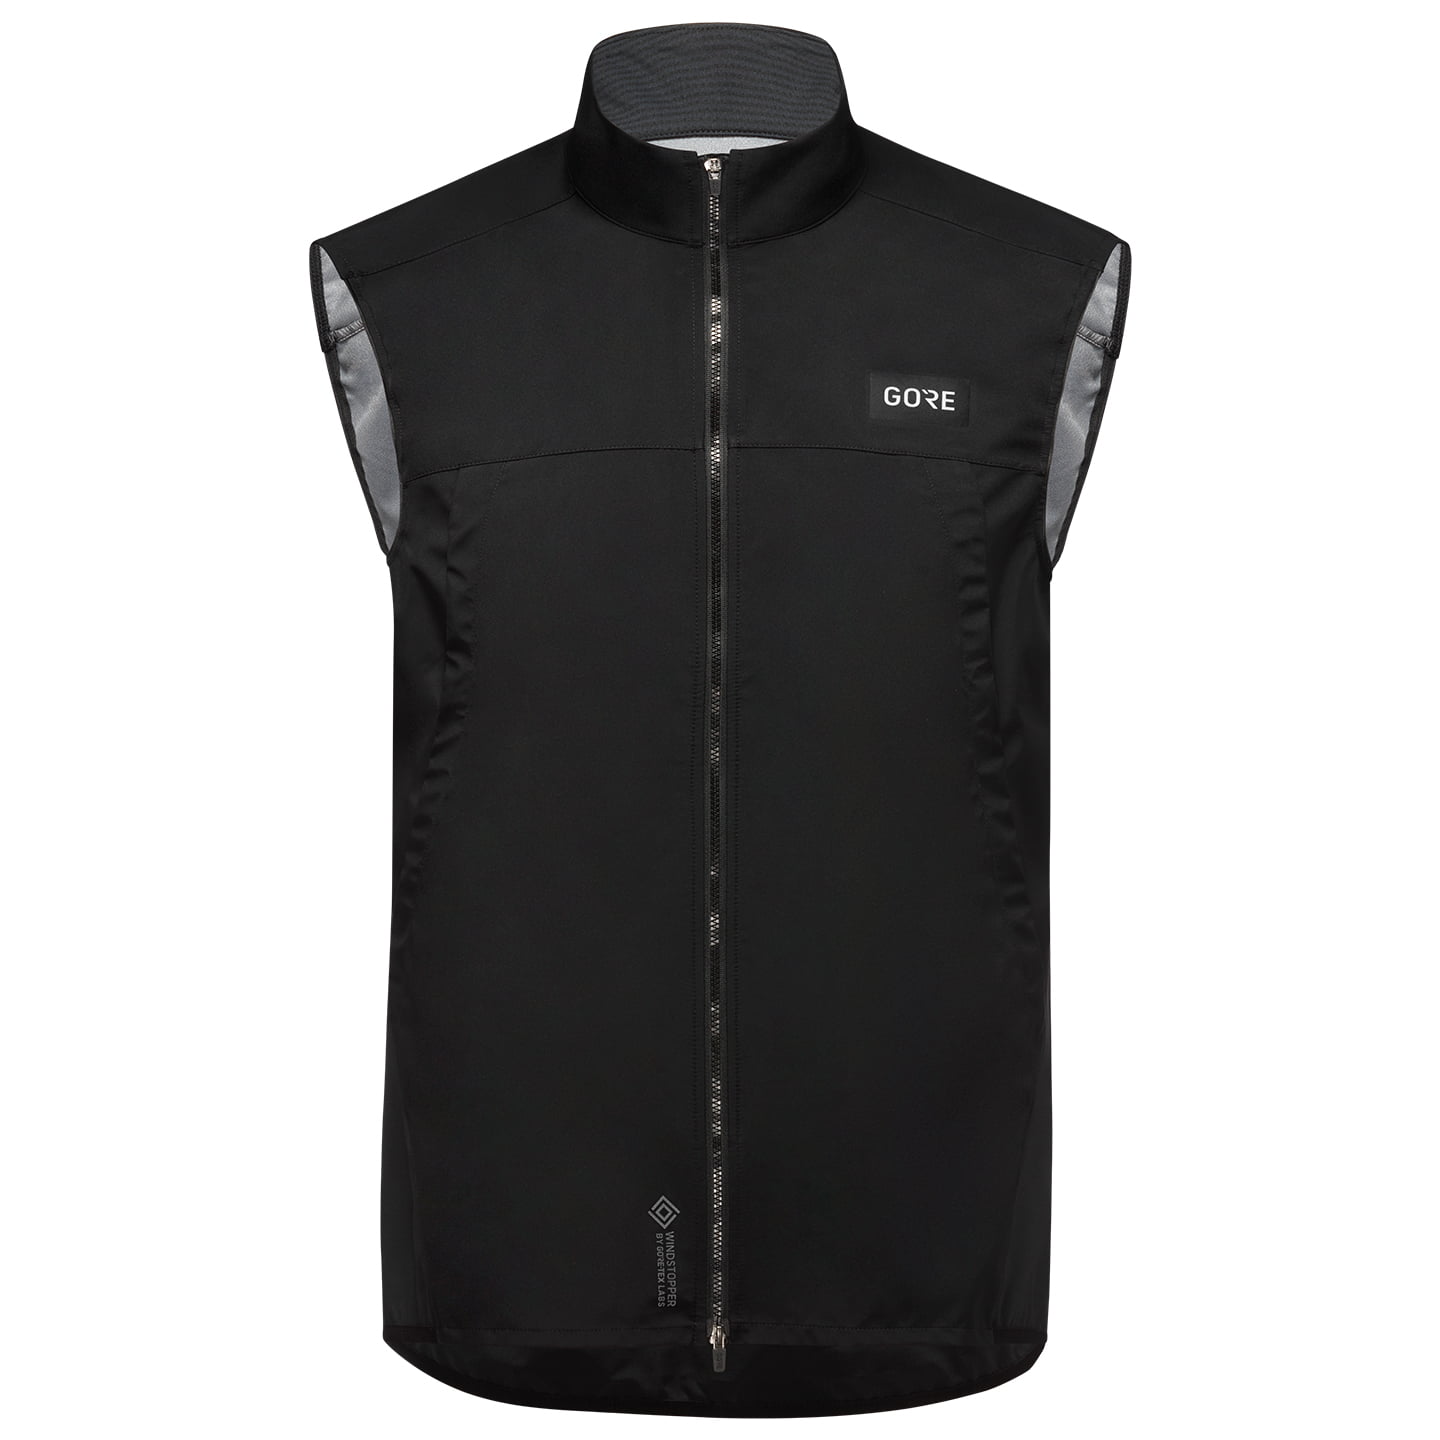 GORE WEAR Cycling vest Everyday Mens, for men, size 3XL, Bike vest, Cycling gear